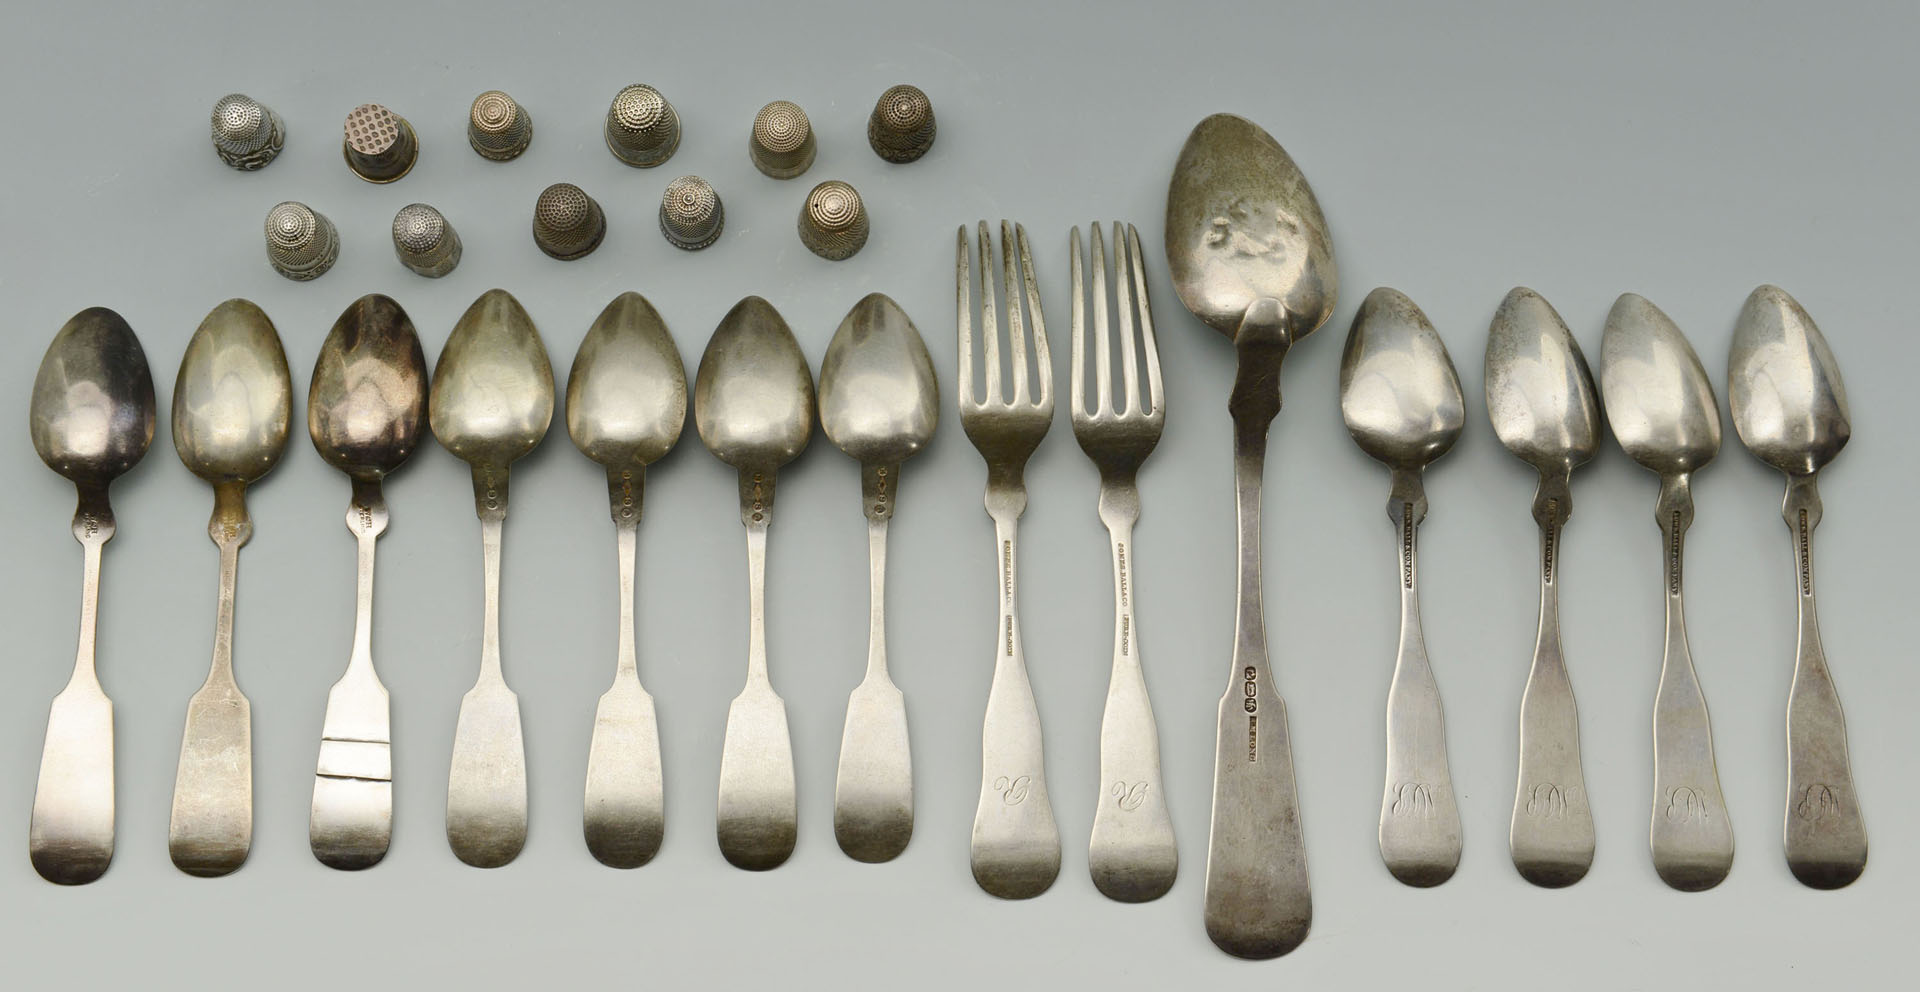 Lot 292: 14 pcs. coin and sterling silver flatware & 11 thi